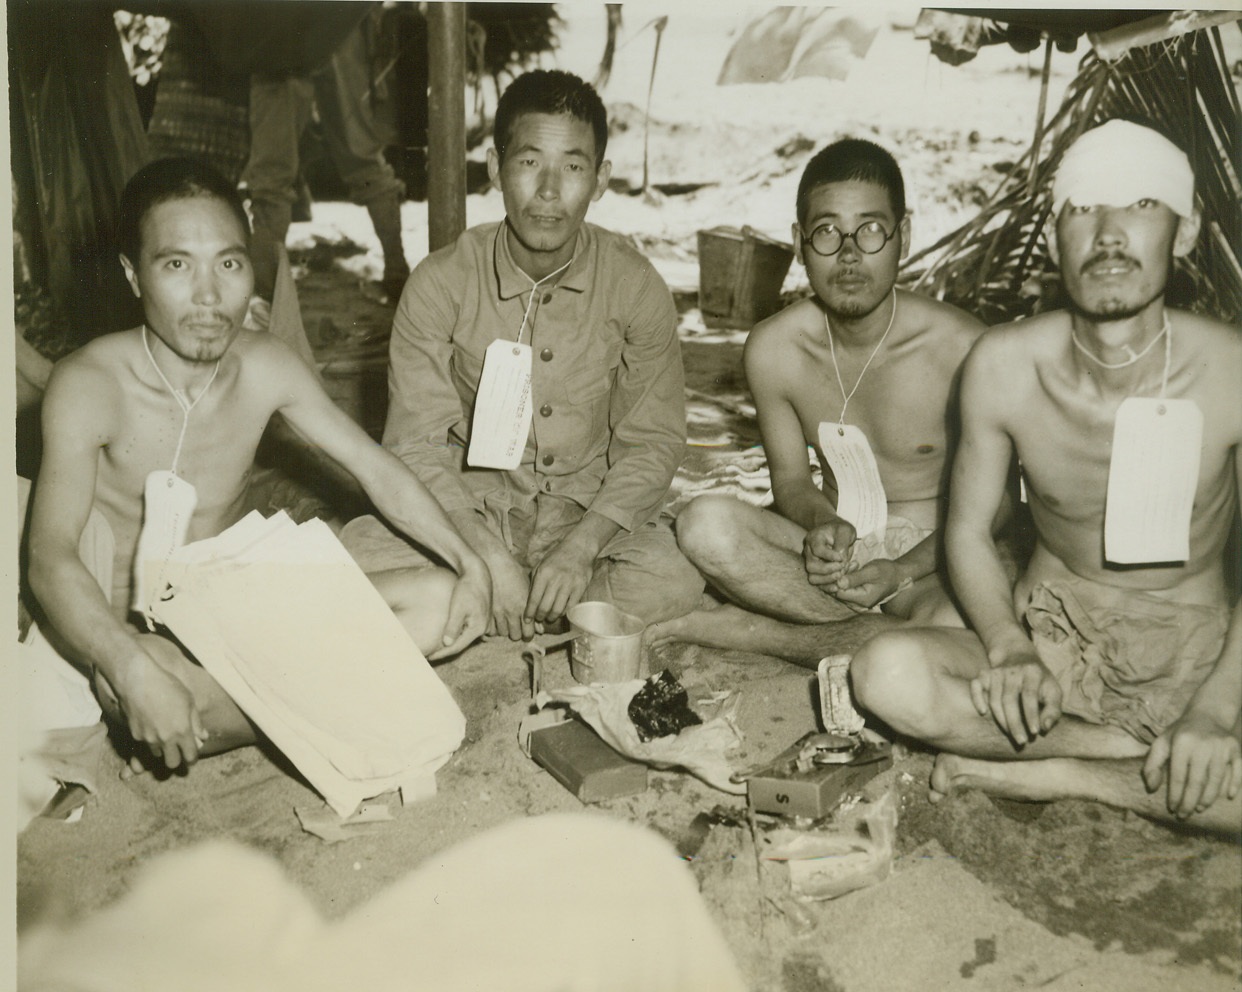 GLAD TO SAMPLE YANK RATIONS, 5/3/1944. DUTCH NEW GUINEA – Jap prisoners, captured during the Allied attack on Aitape, Dutch New Guinea, part of the Hollandia invasions, squat around U.S. field rations which they enjoy in spite of the fact that they wanted to be killed during the attack. (Passed by censors.) Credit: ACME photo by Thomas L. Shafer for the War Picture Pool;